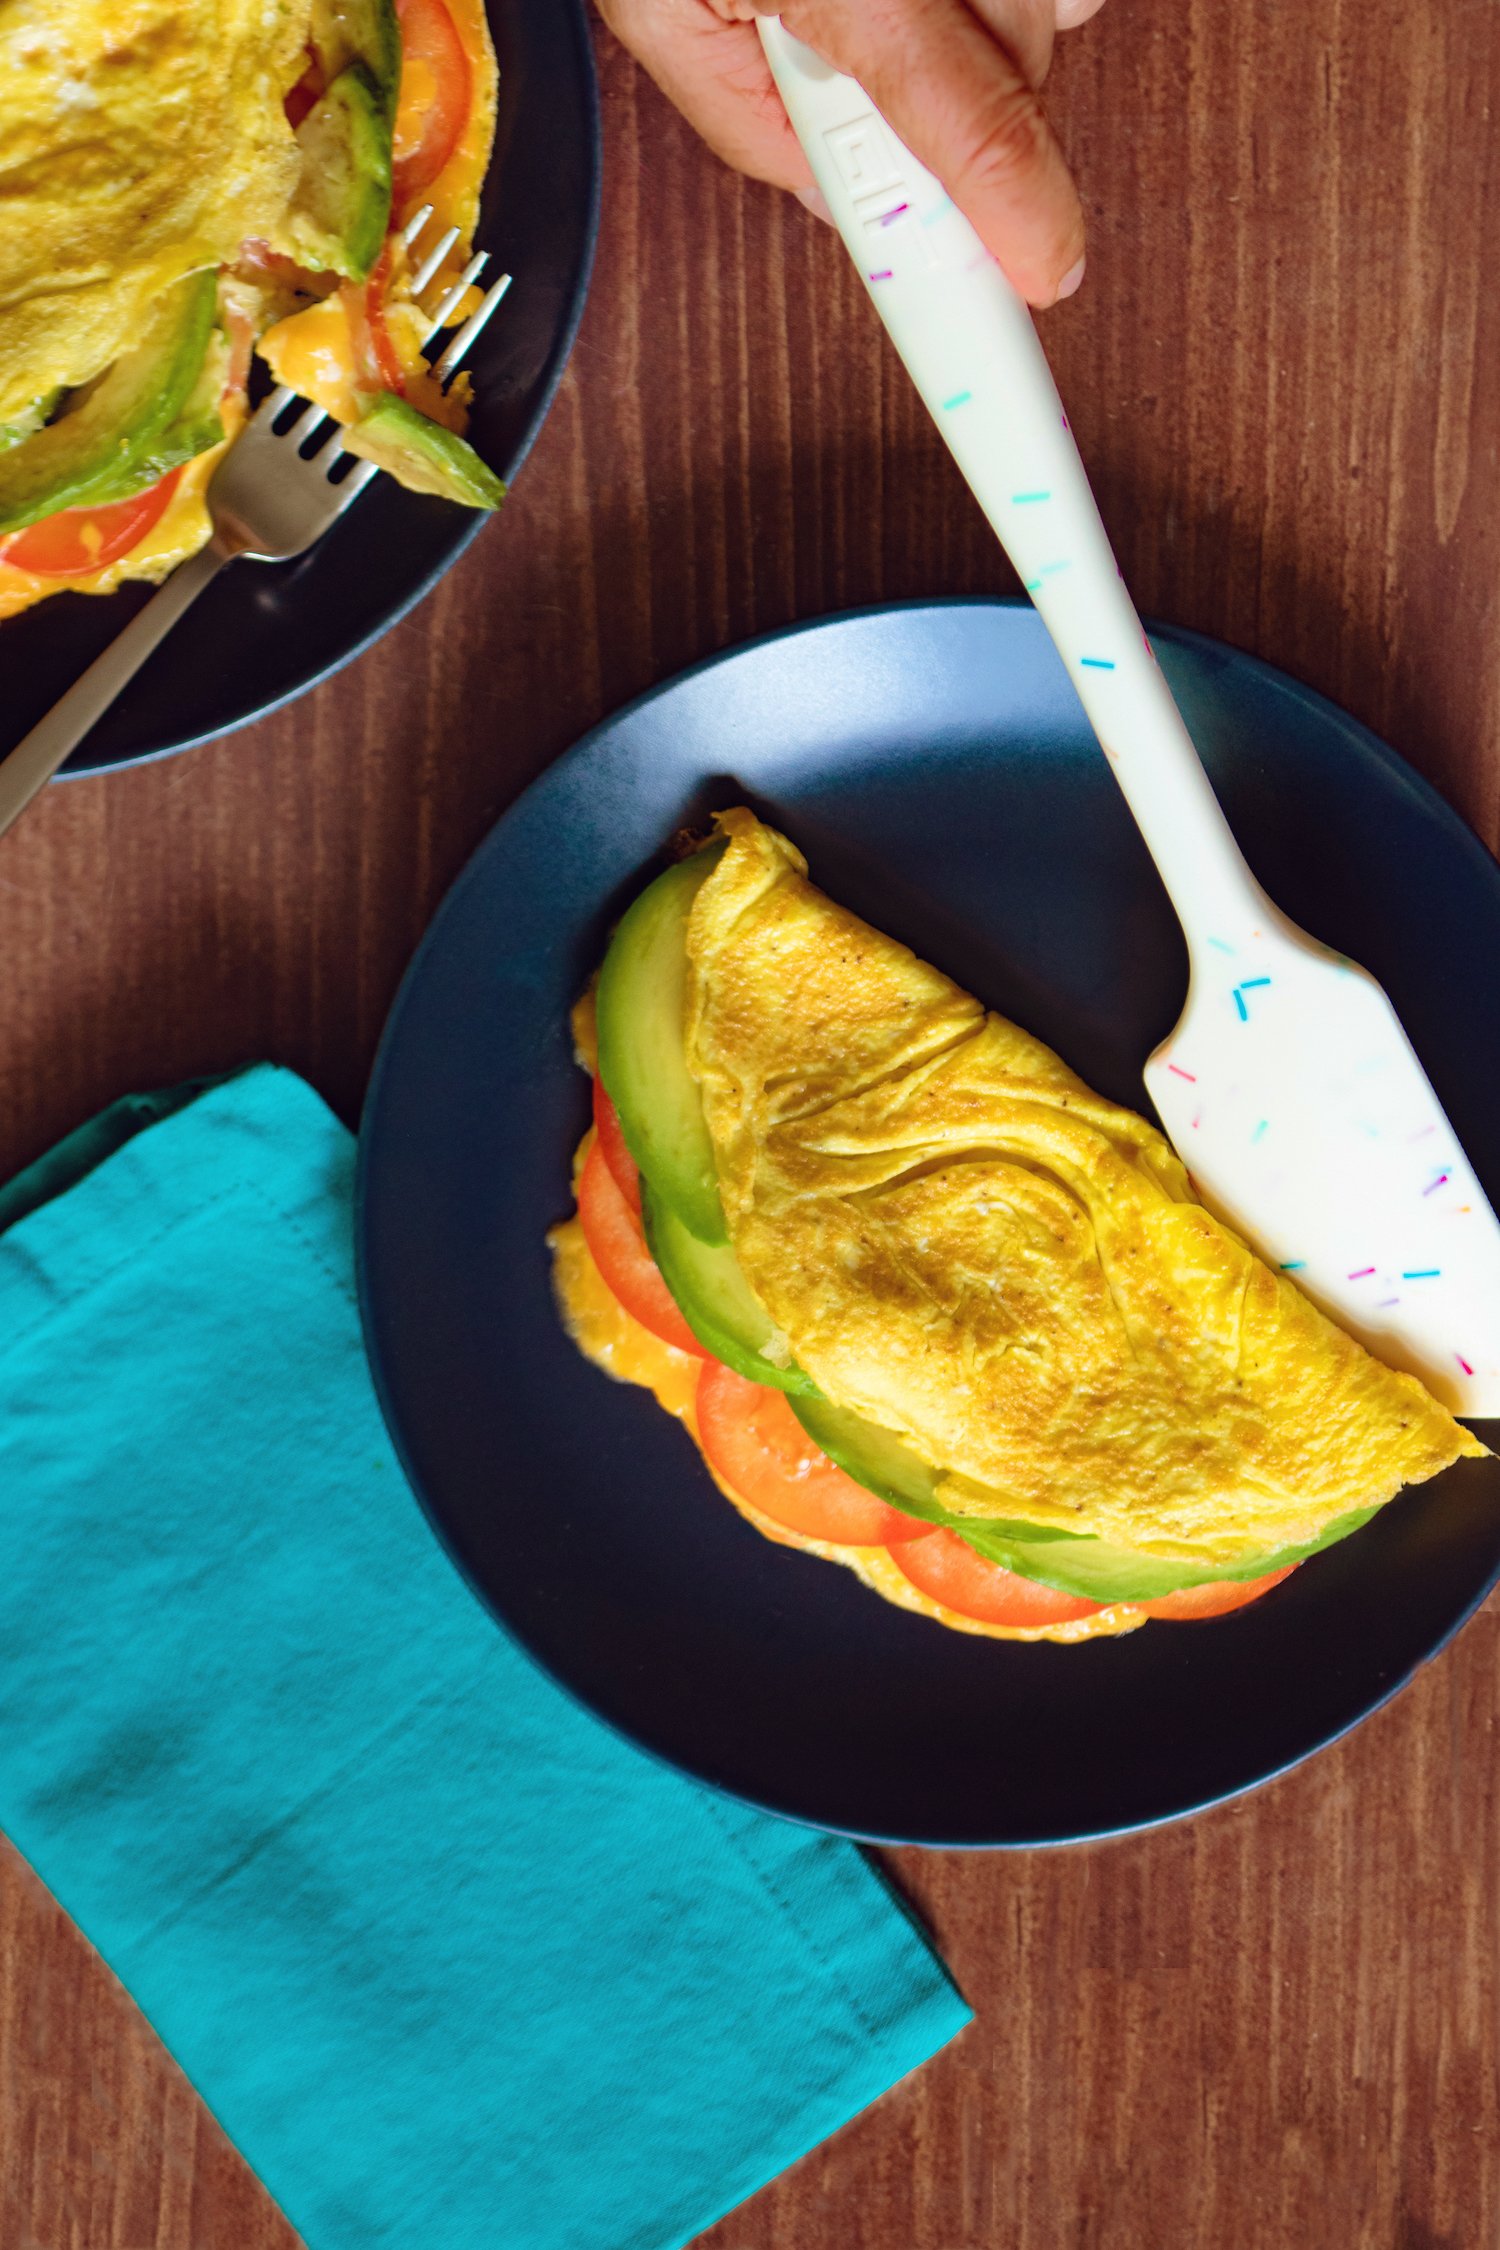 Image for Avocado, Tomato and Cheddar Omelet